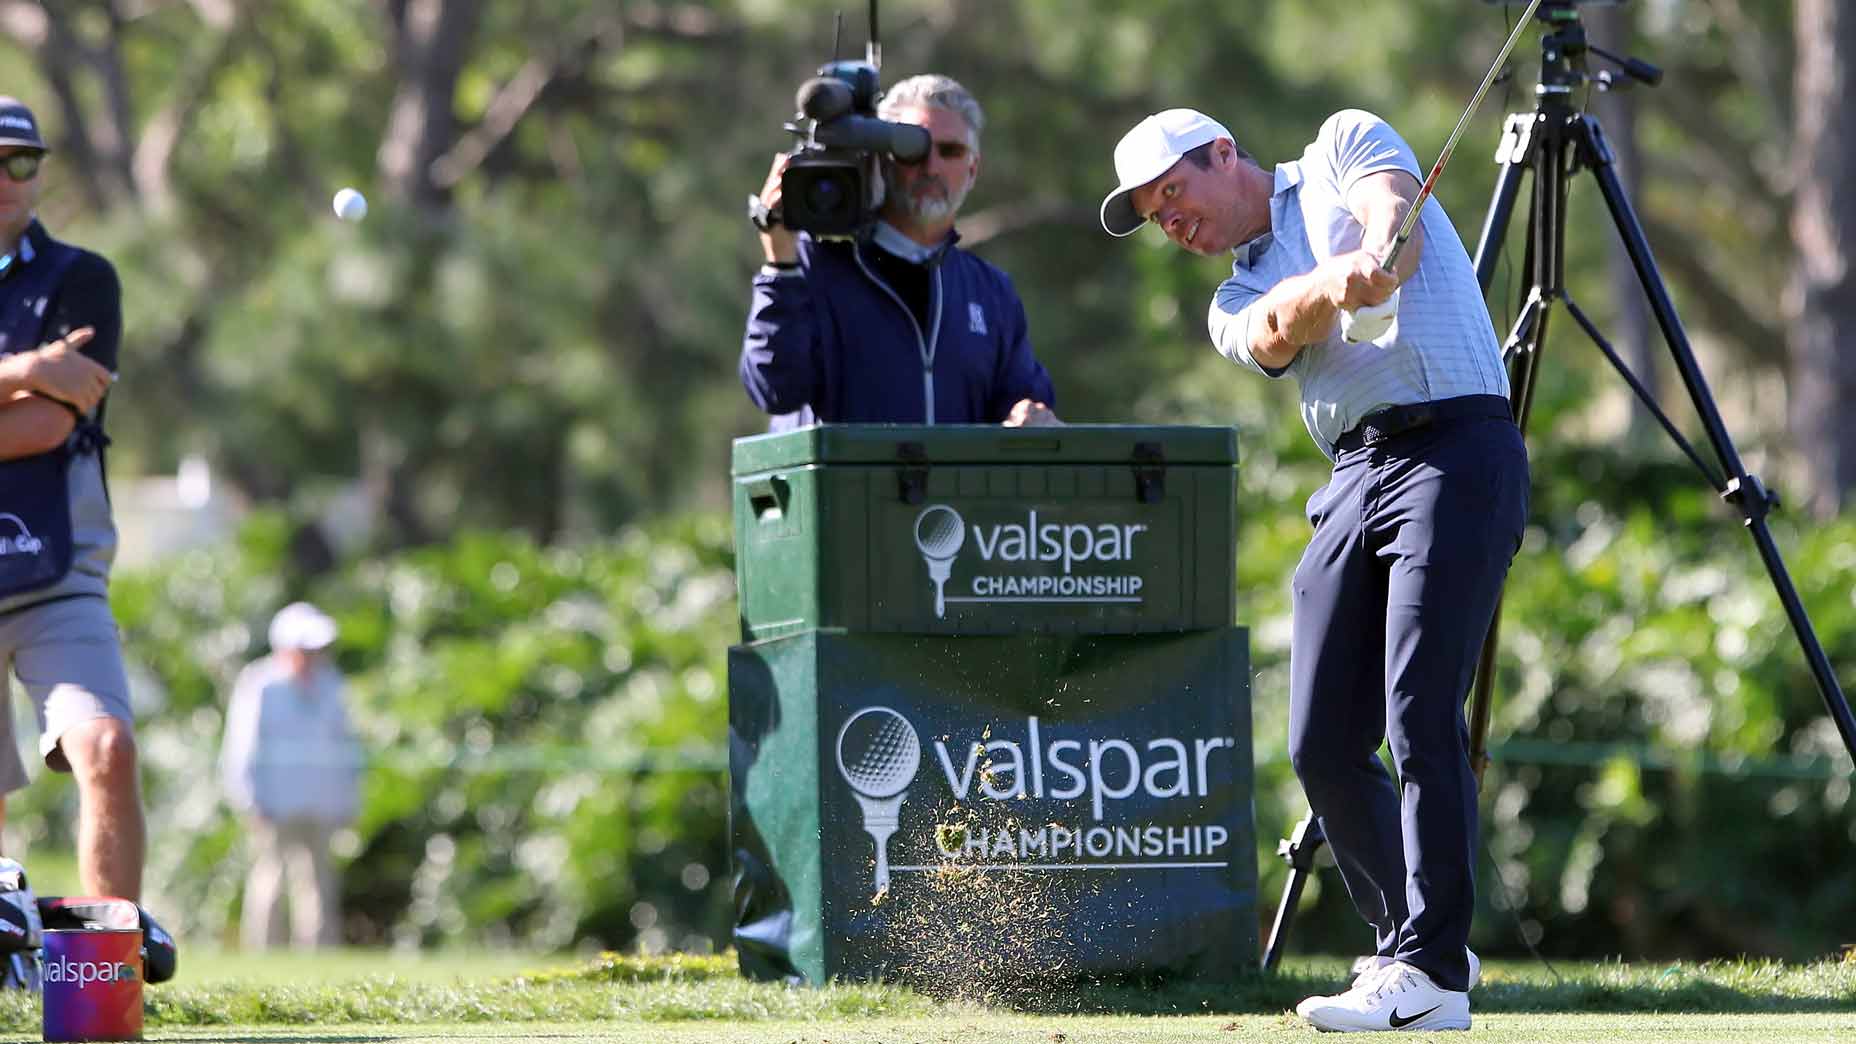 How to watch 2021 Valspar Championship on Thursday Tee times, TV